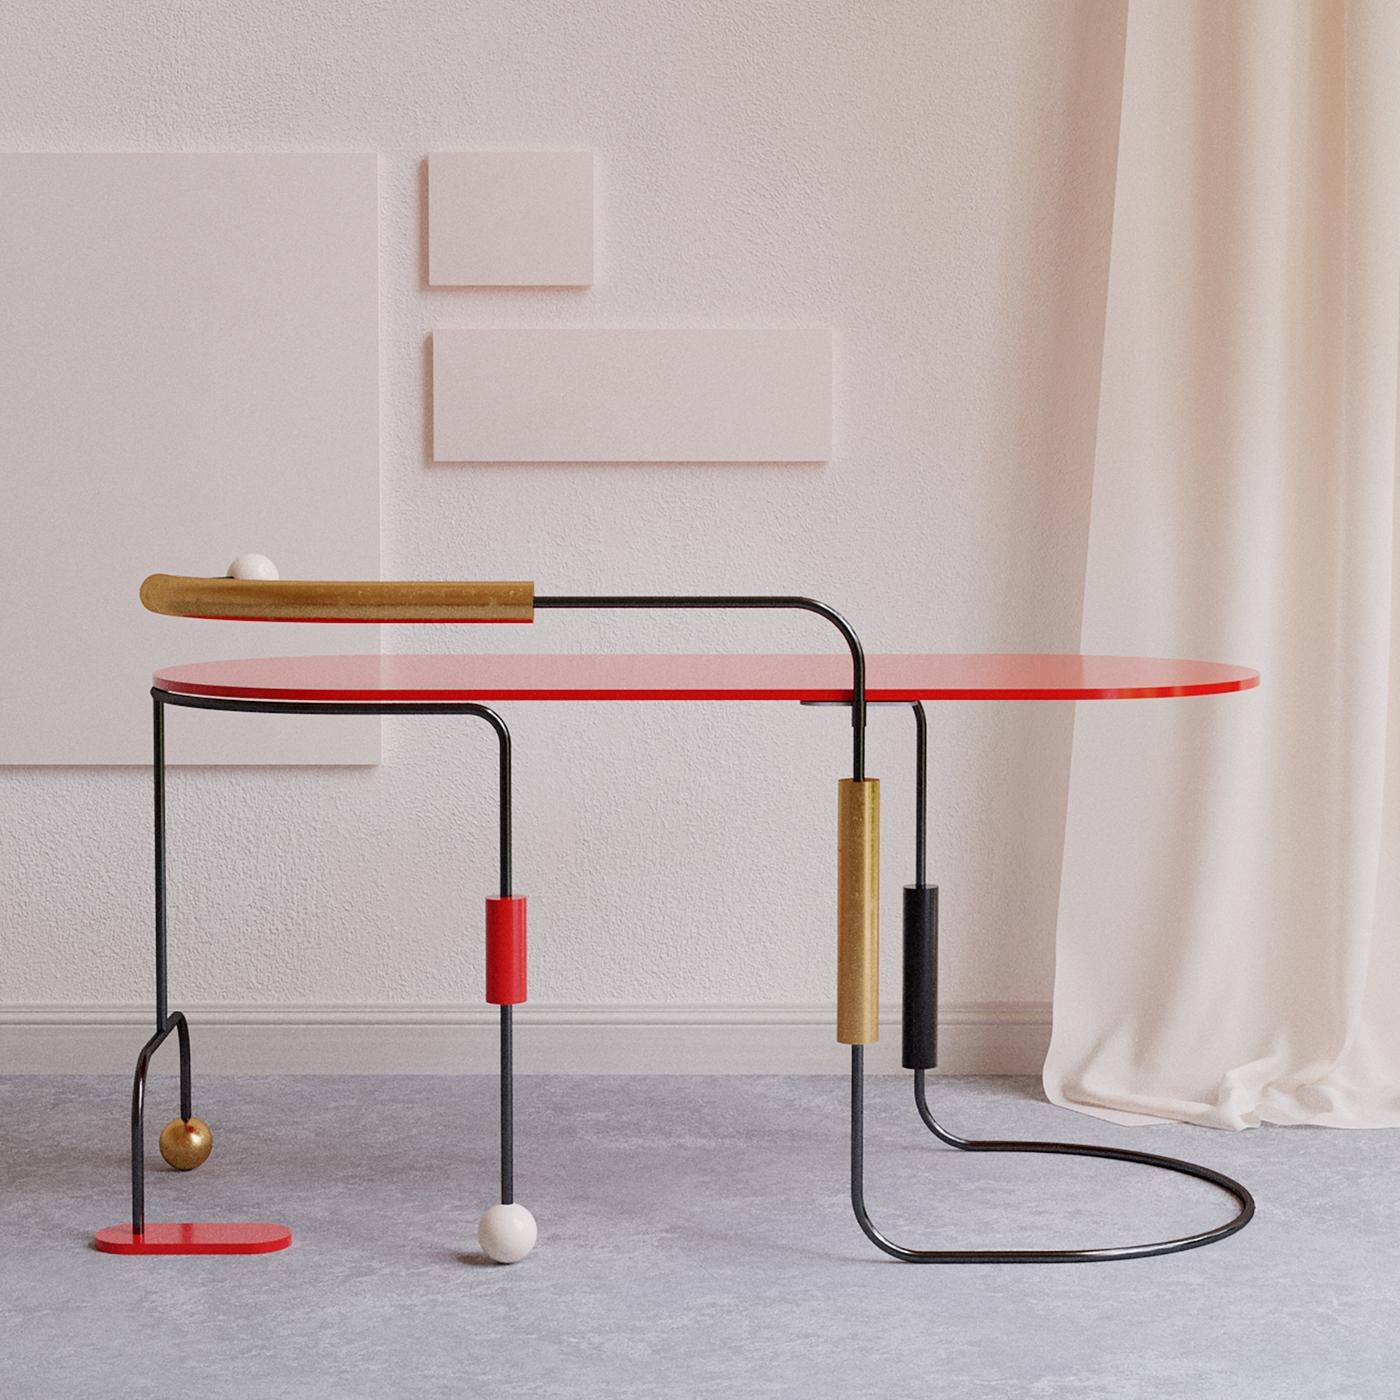 This sculptural desk owes its eccentric design to the dots and dashes typical of the Morse language that names the whole collection. Colorful and dynamic, its asymmetric silhouette with a cylindrical steel frame incorporates cylinders and spheres